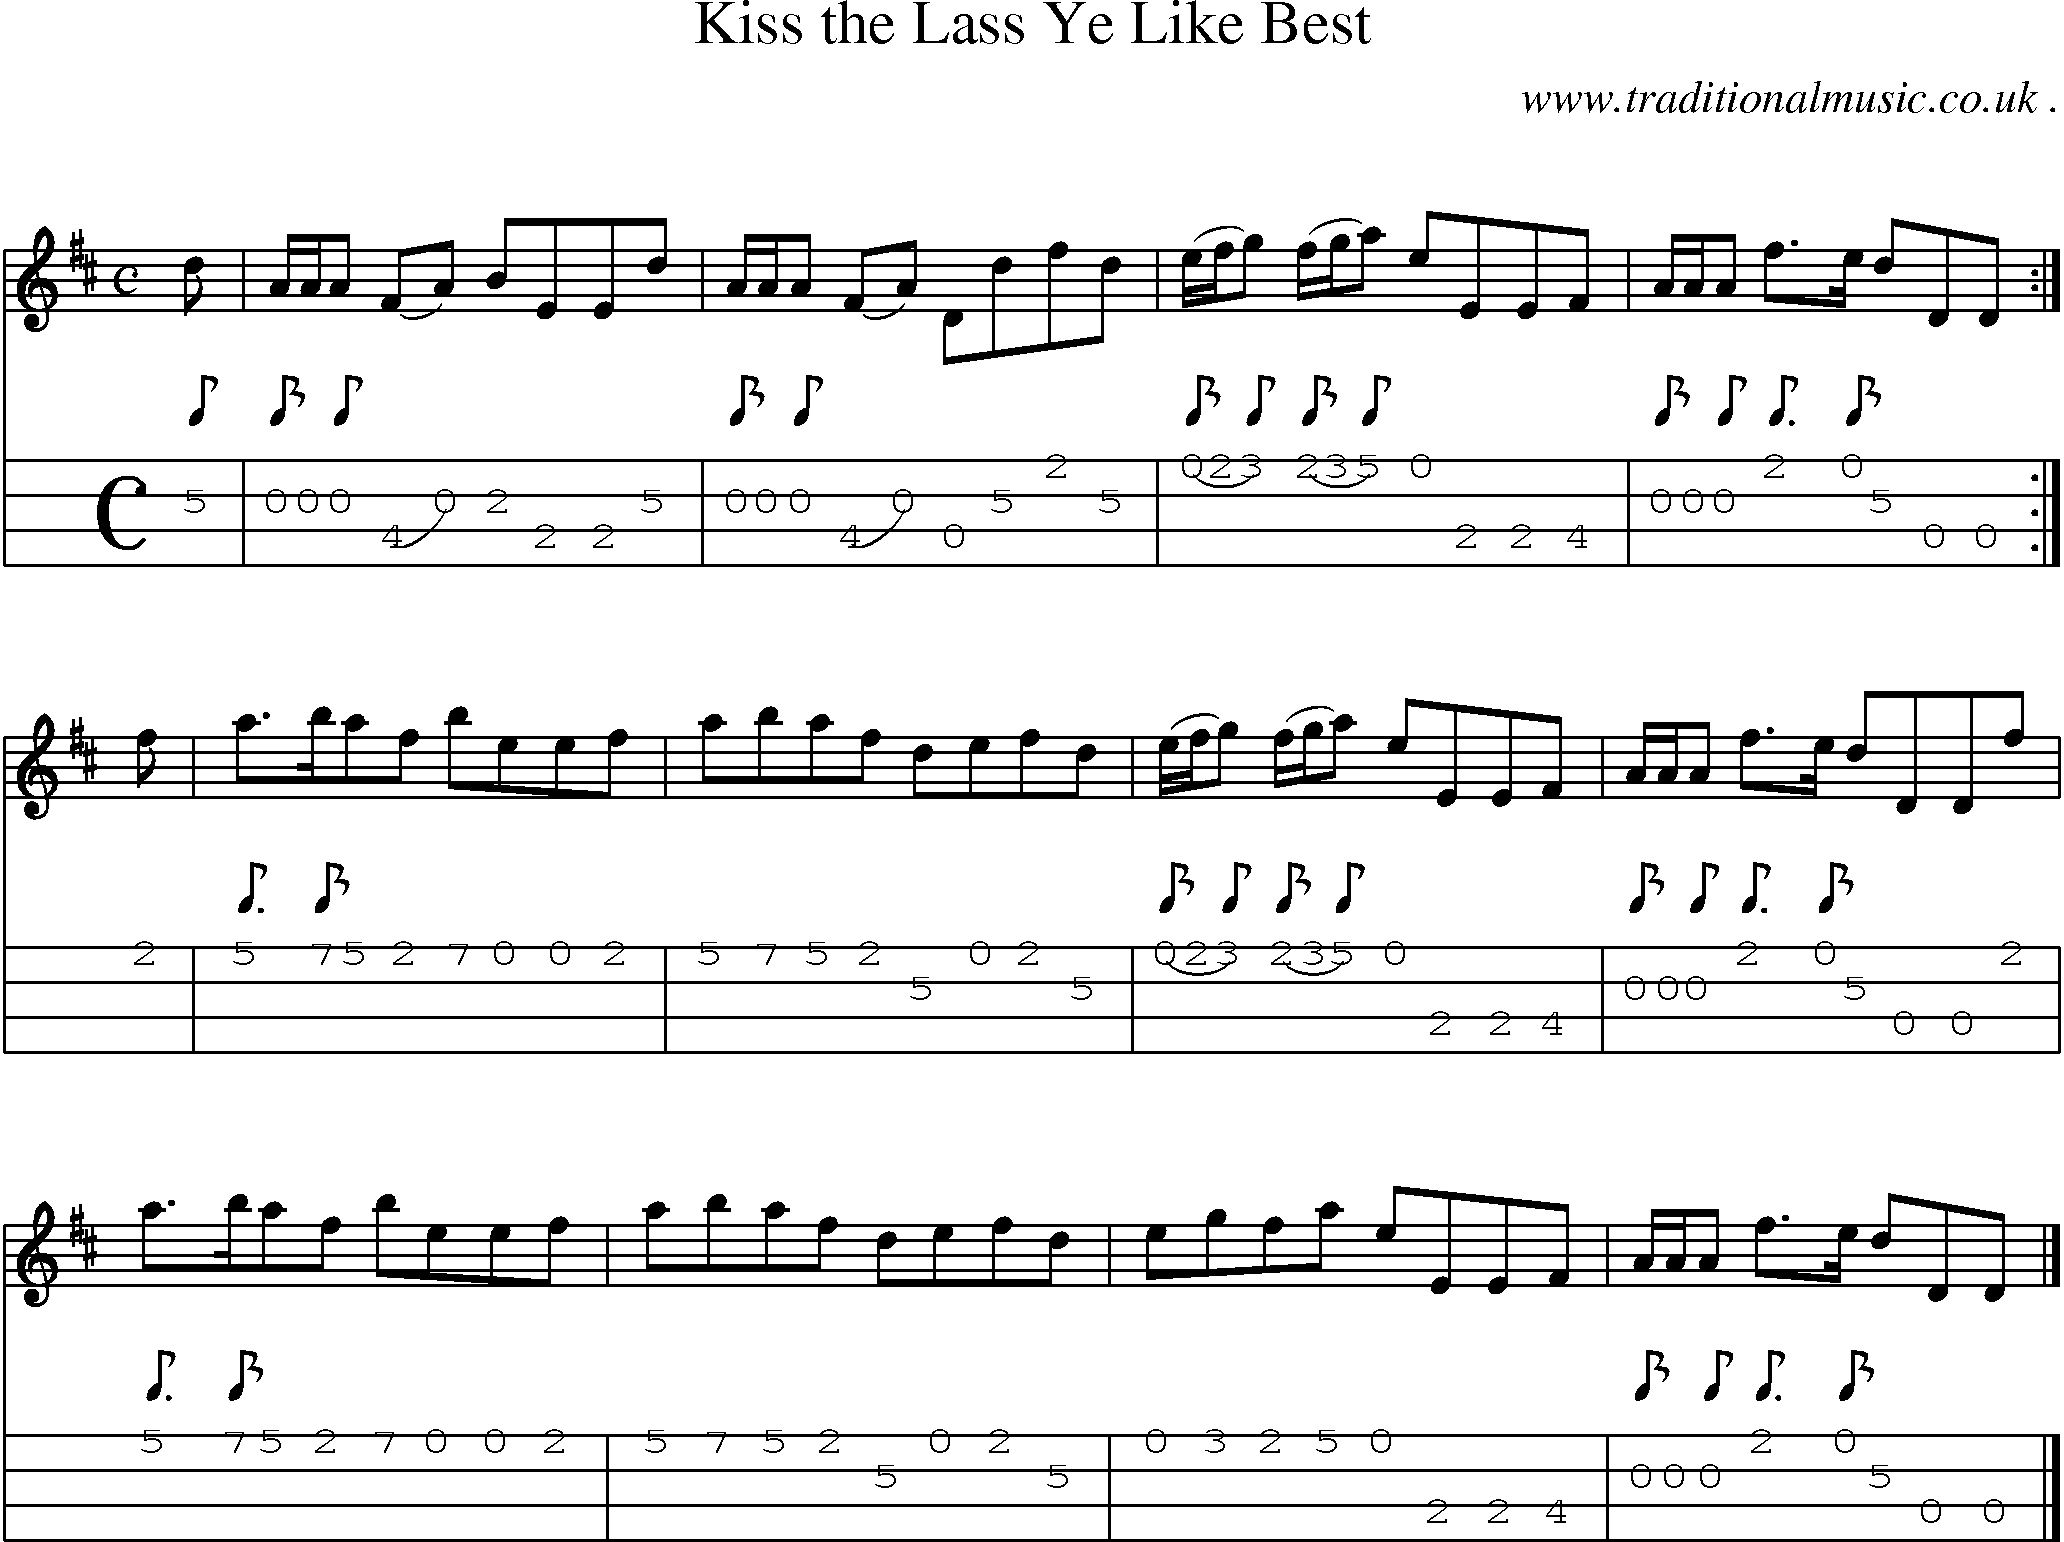 Sheet-music  score, Chords and Mandolin Tabs for Kiss The Lass Ye Like Best